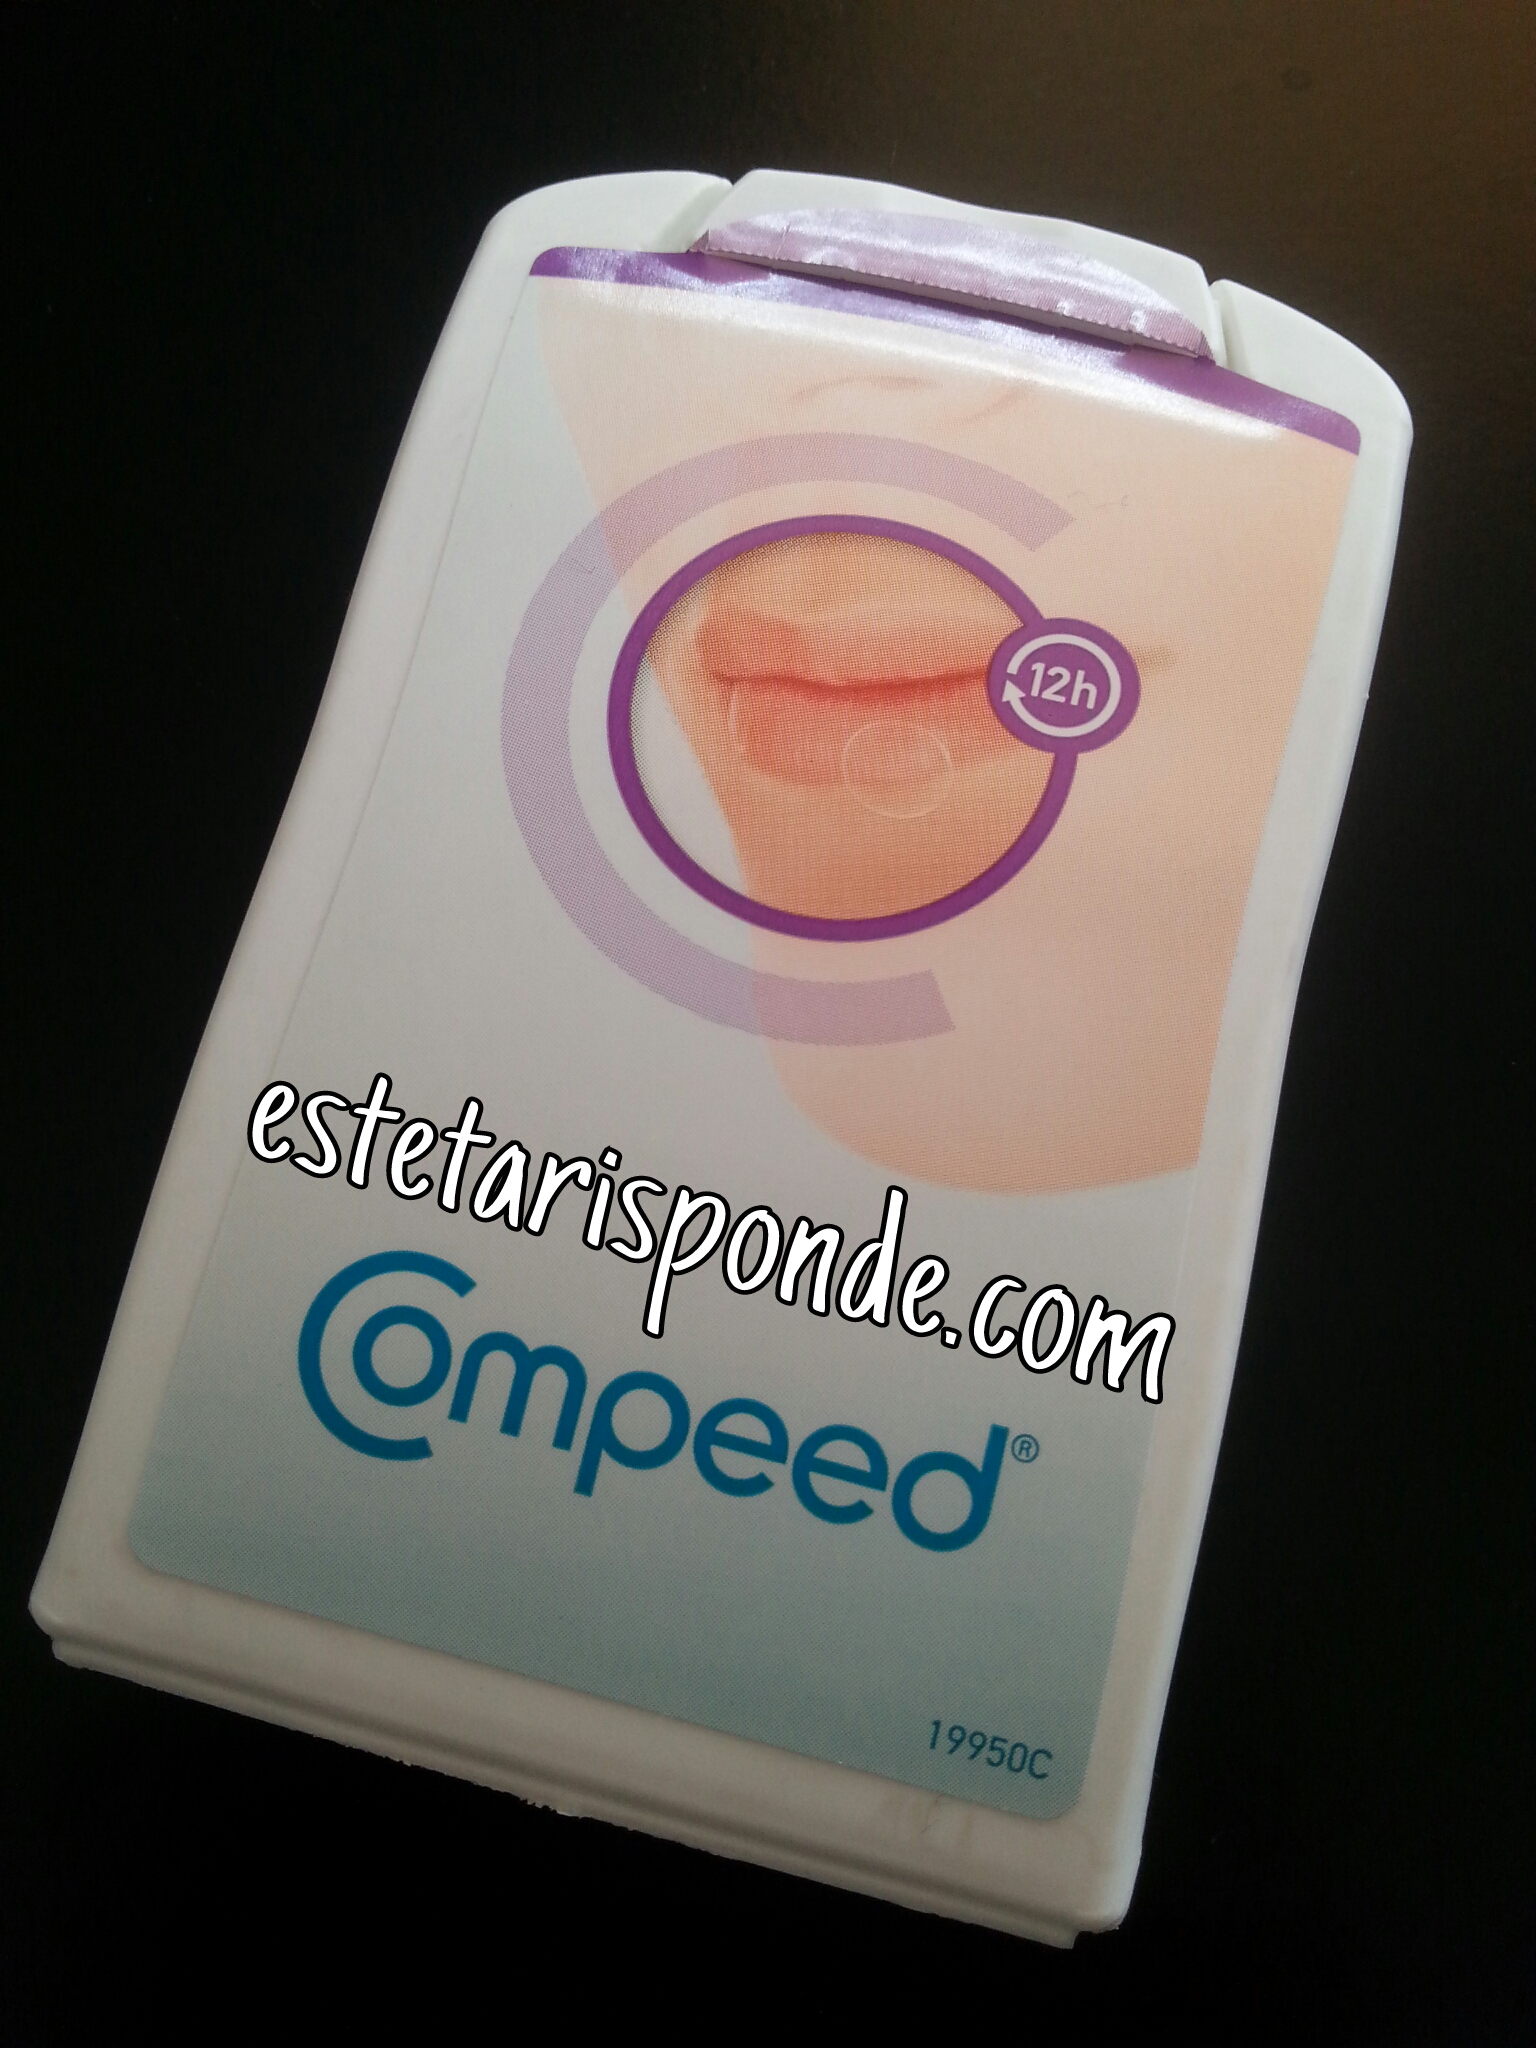 Compeed herpes patch